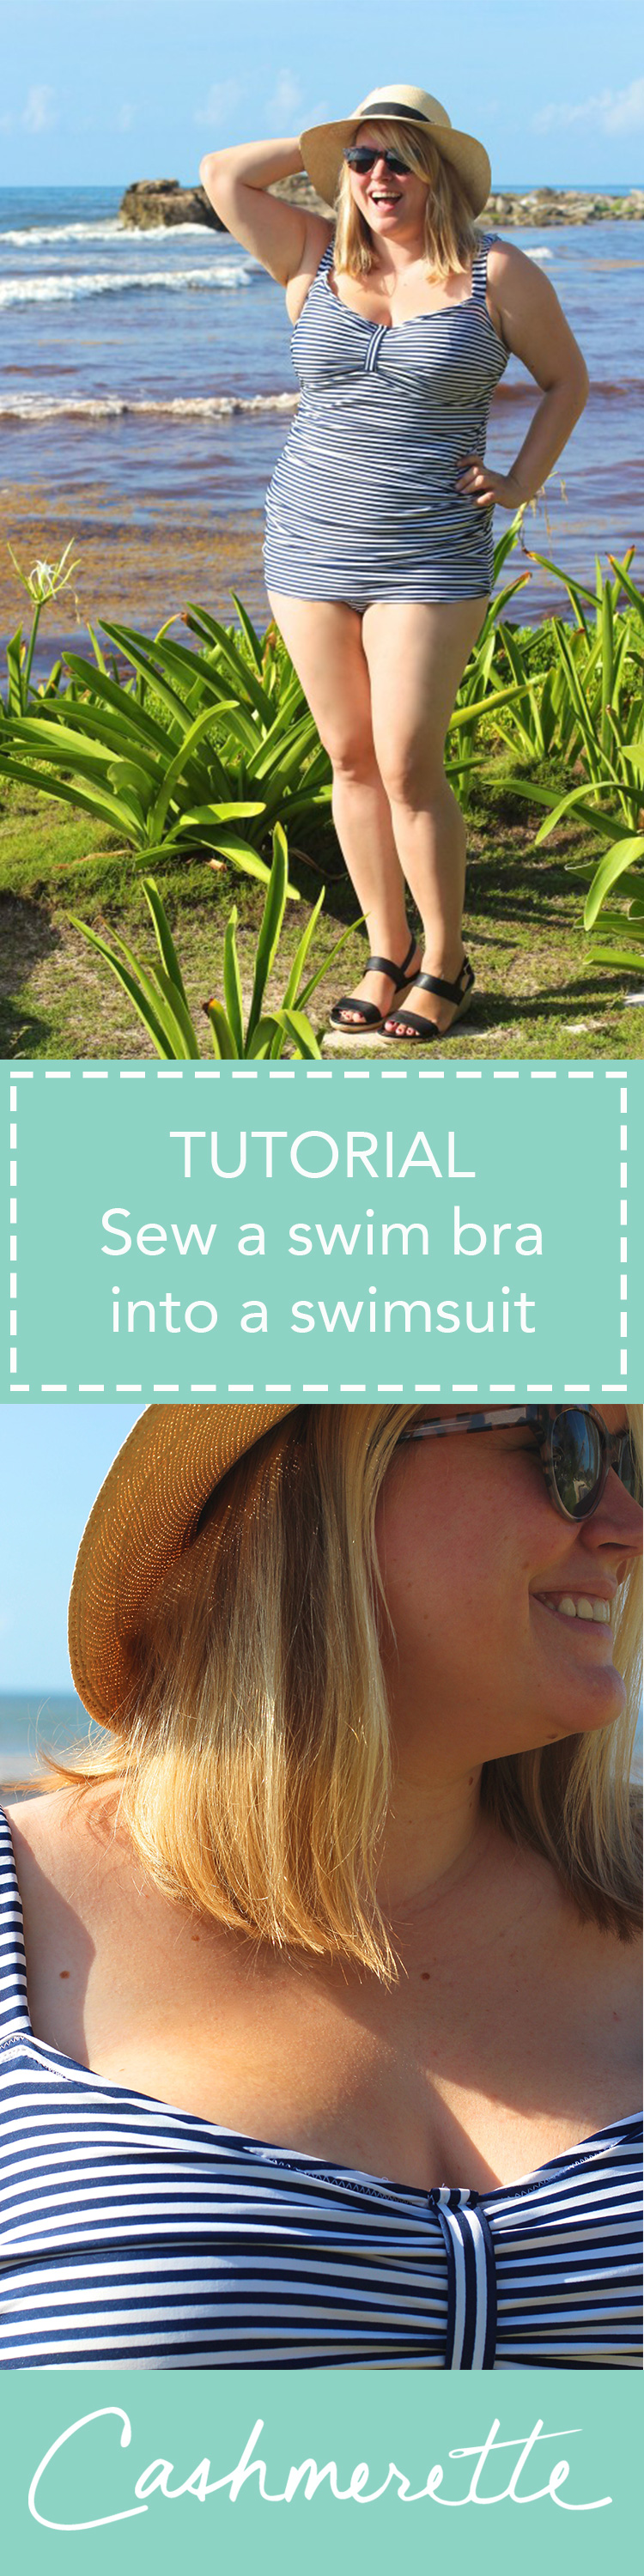 How to sew a swim bra into a swimsuit! Tutorial by Cashmerette